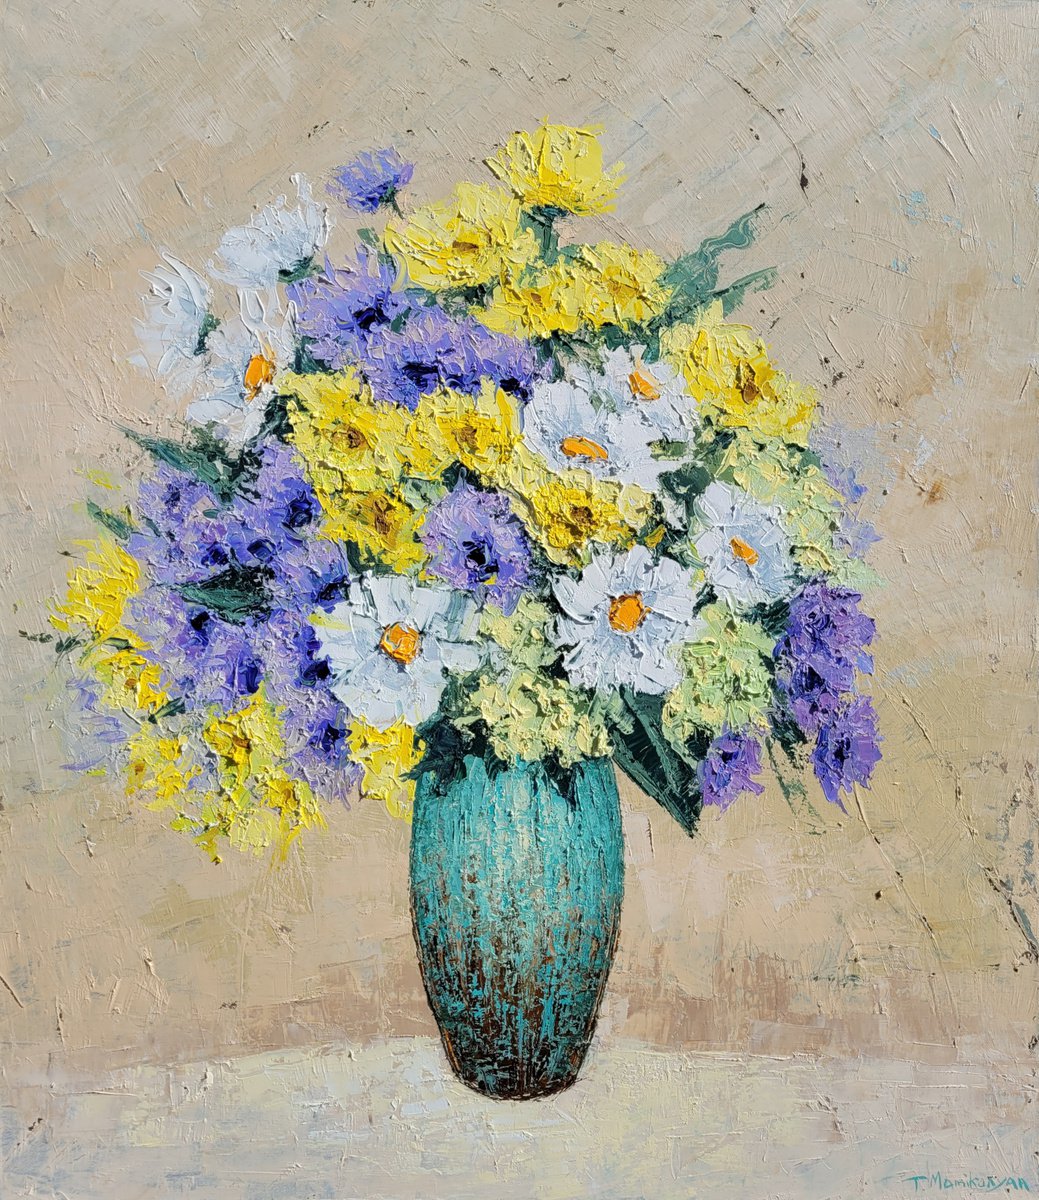 Bouquet in a vase 70x80cm by Tigran Mamikonyan